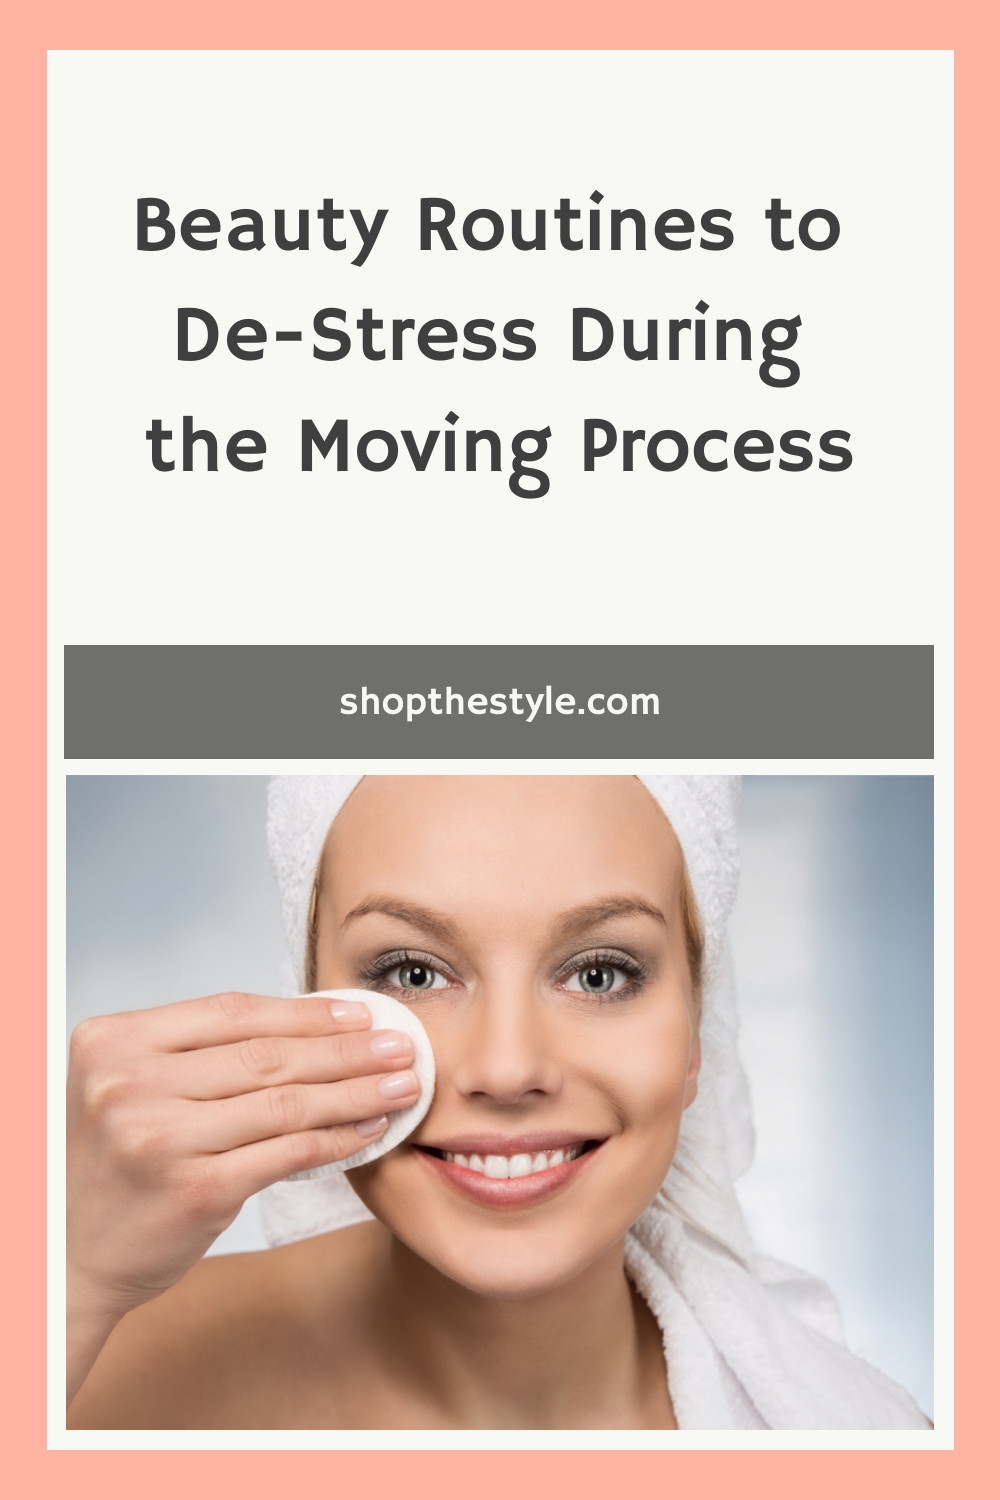 Beauty Routines to De-Stress During the Moving Process